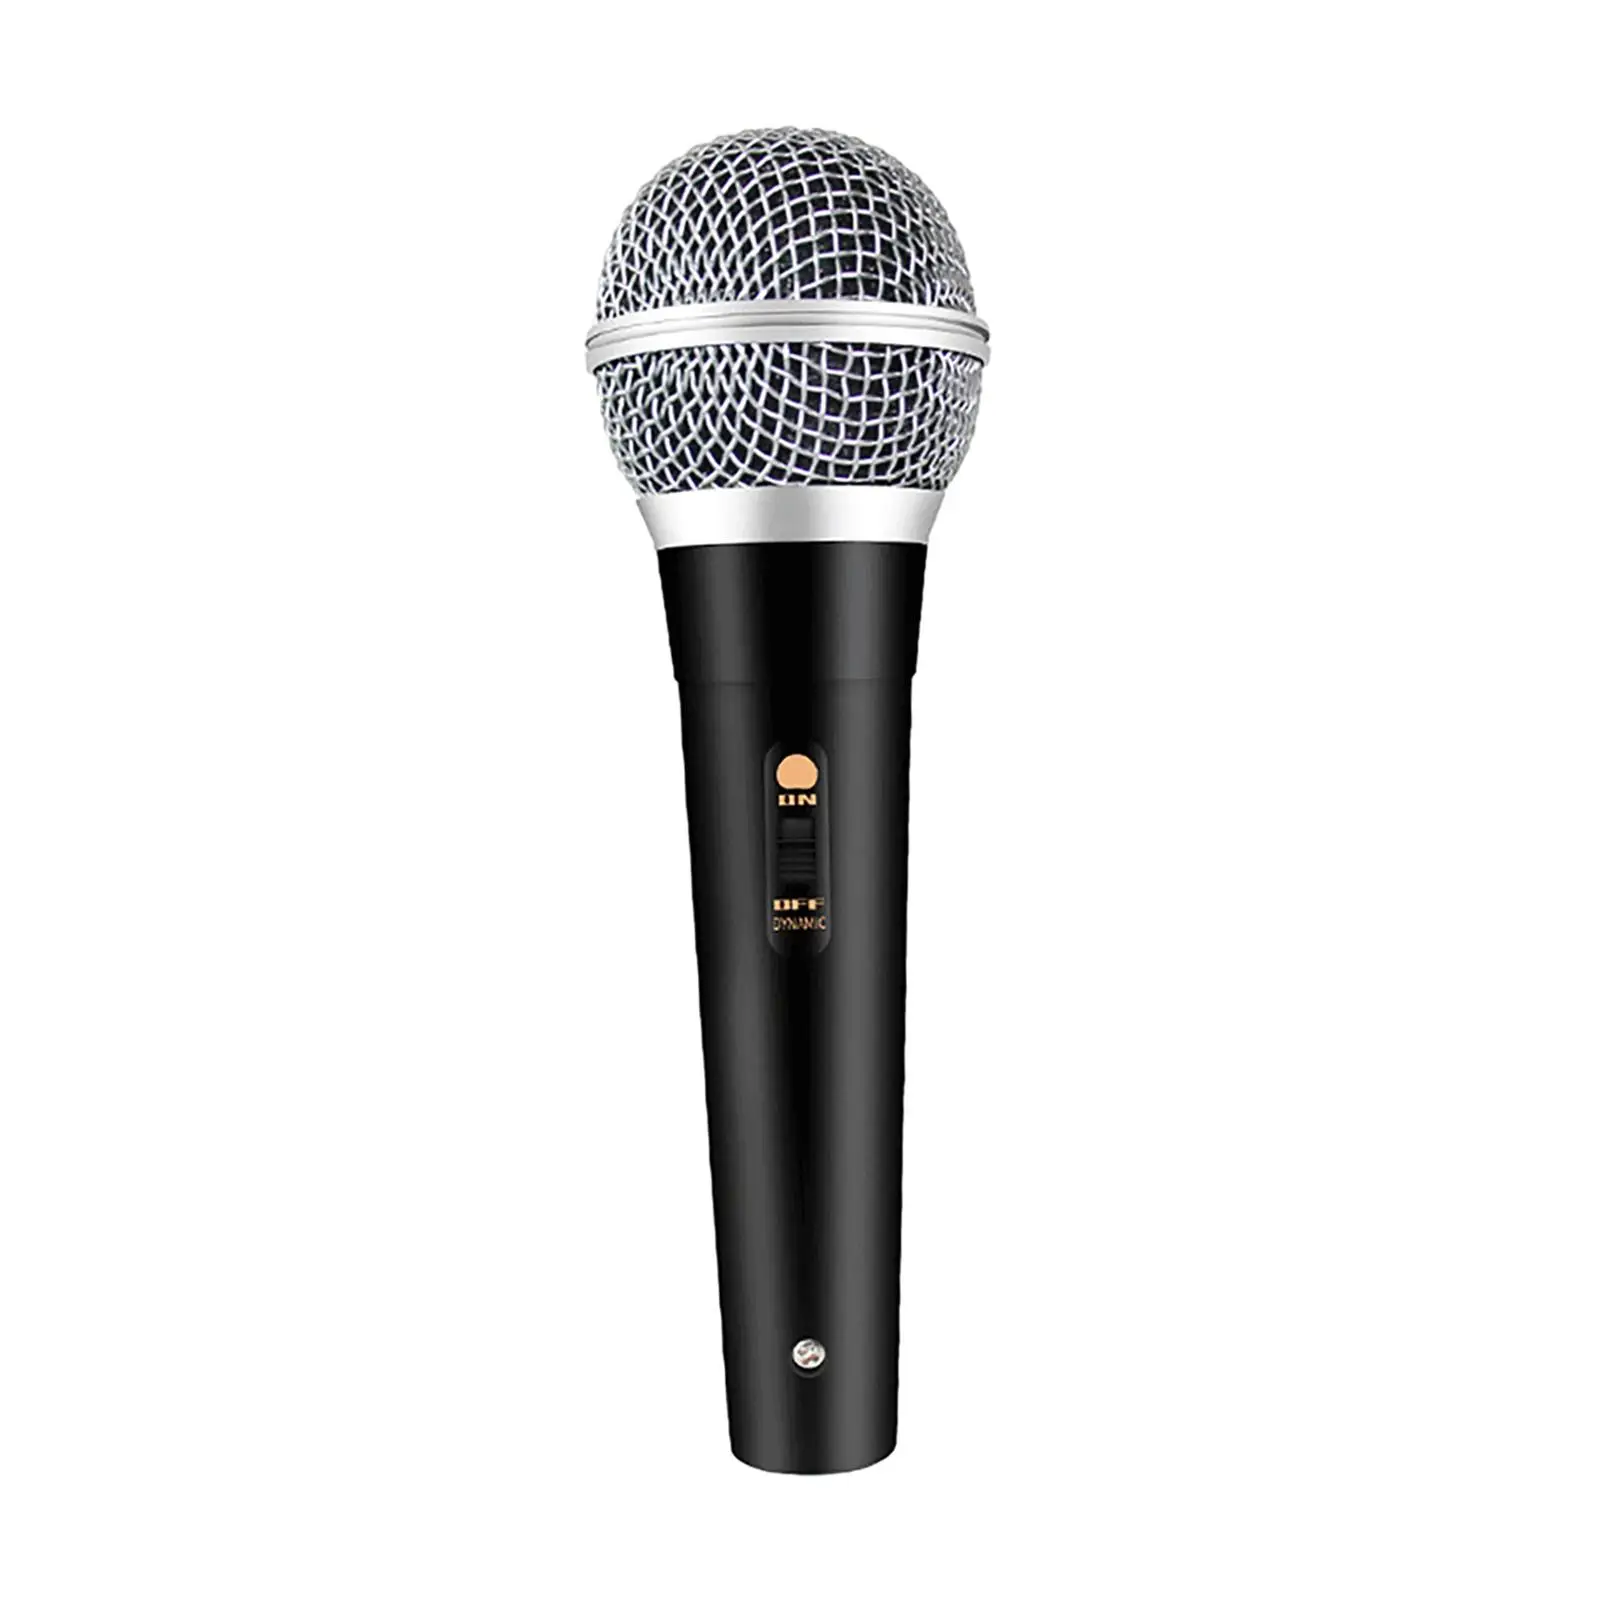 Wired Dynamic Karaoke Mic Microphone Mic Metal Wire Mesh Head Vocalist Microphone 9.8ft Cable for Stage Speech Wedding Durable